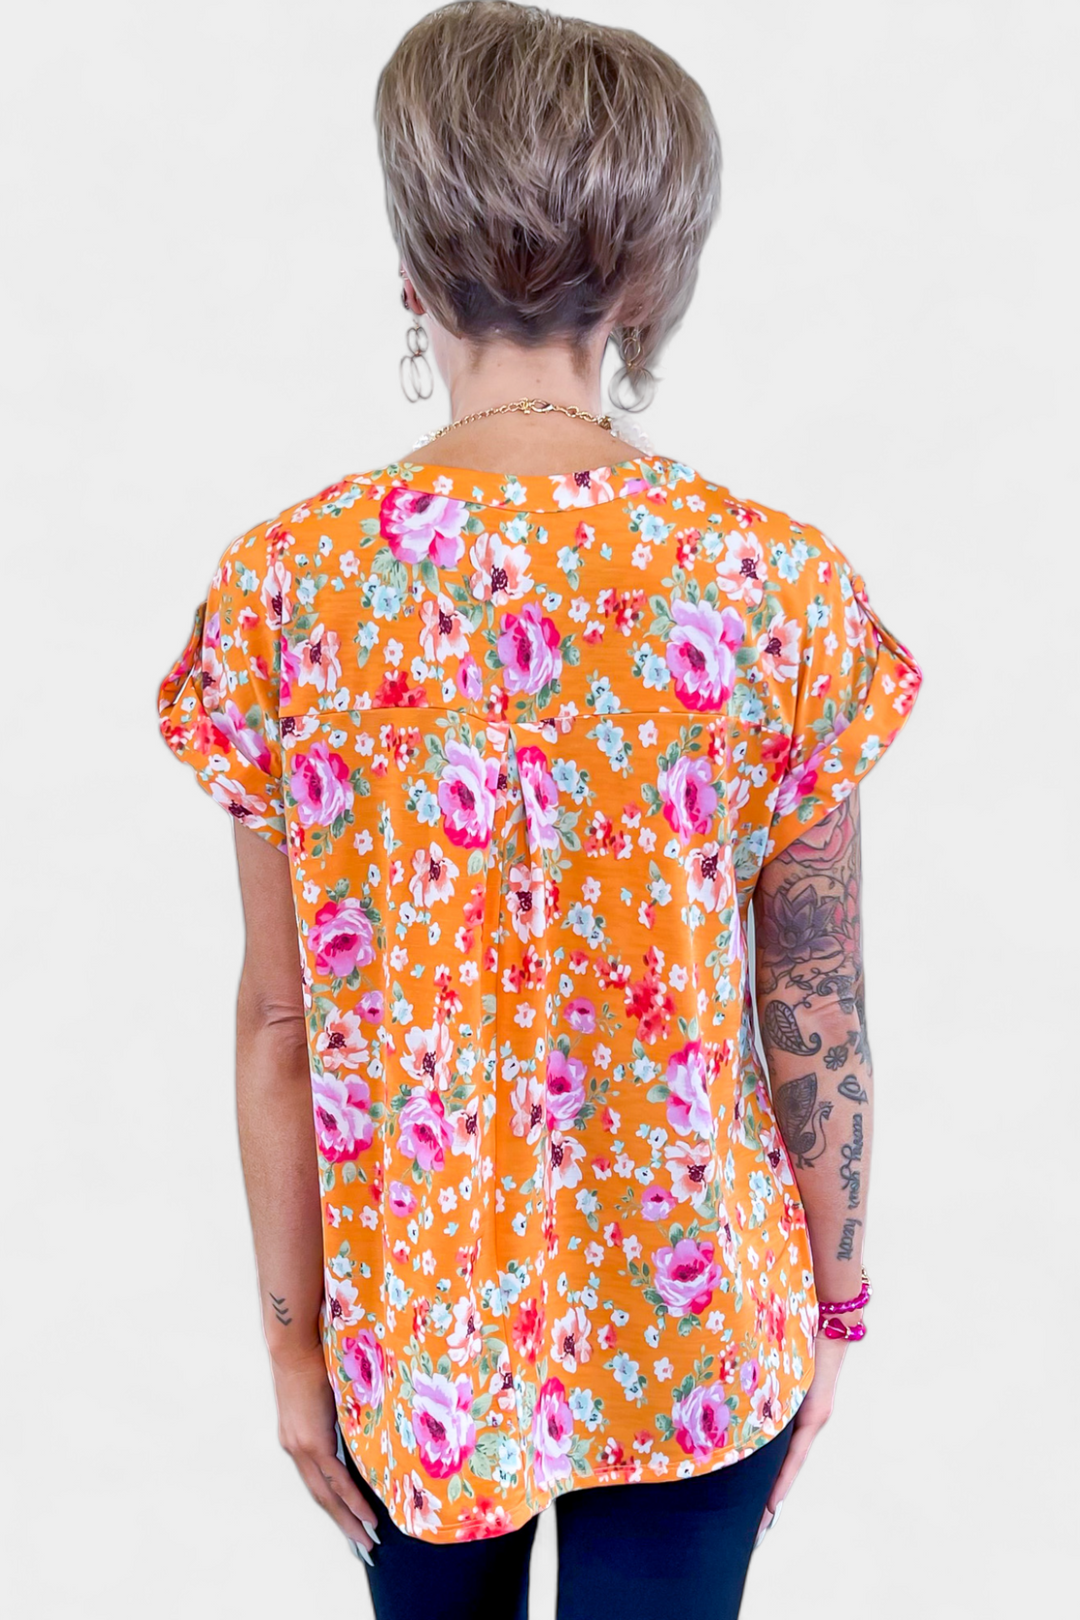 Apricot Floral Lizzy Short Sleeve Top